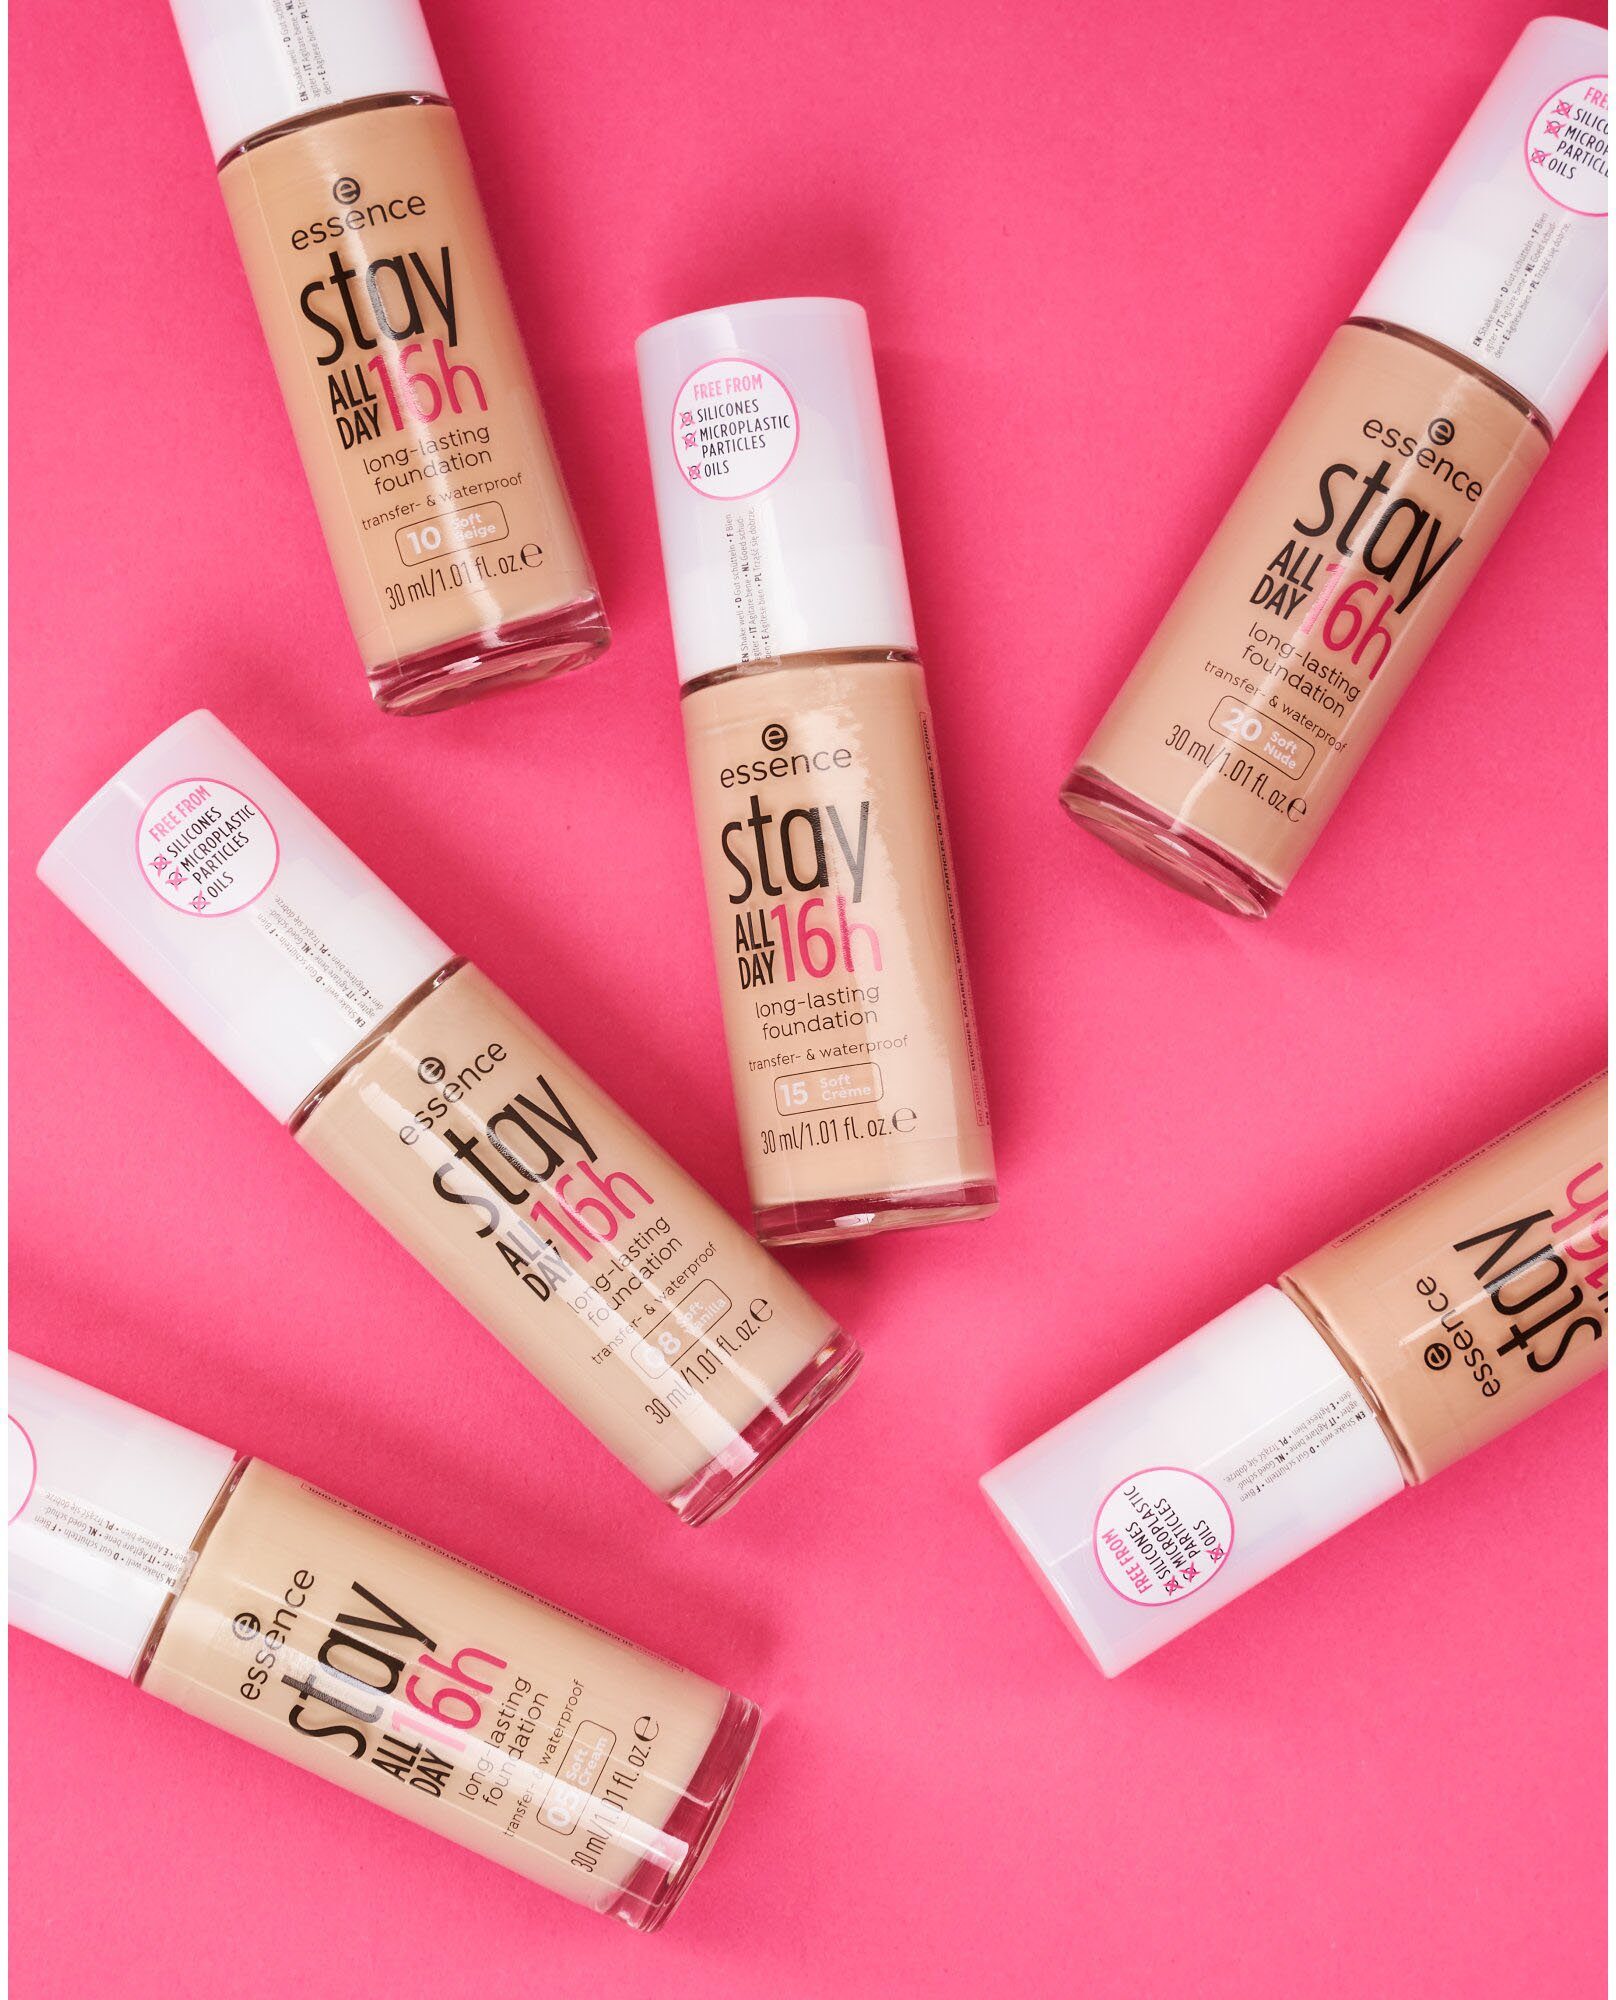 Sand Essence stay 16h 3-tlg. DAY ALL Foundation Soft long-lasting,